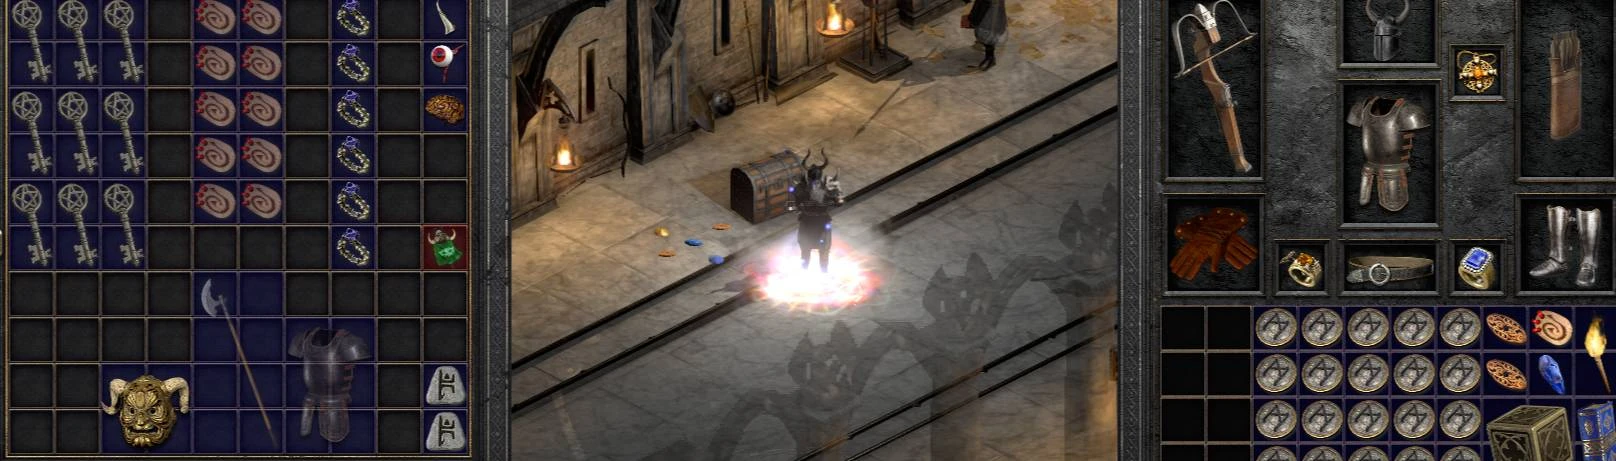 Diablo 2: Resurrected Is Not Compatible With All Mods From The Original